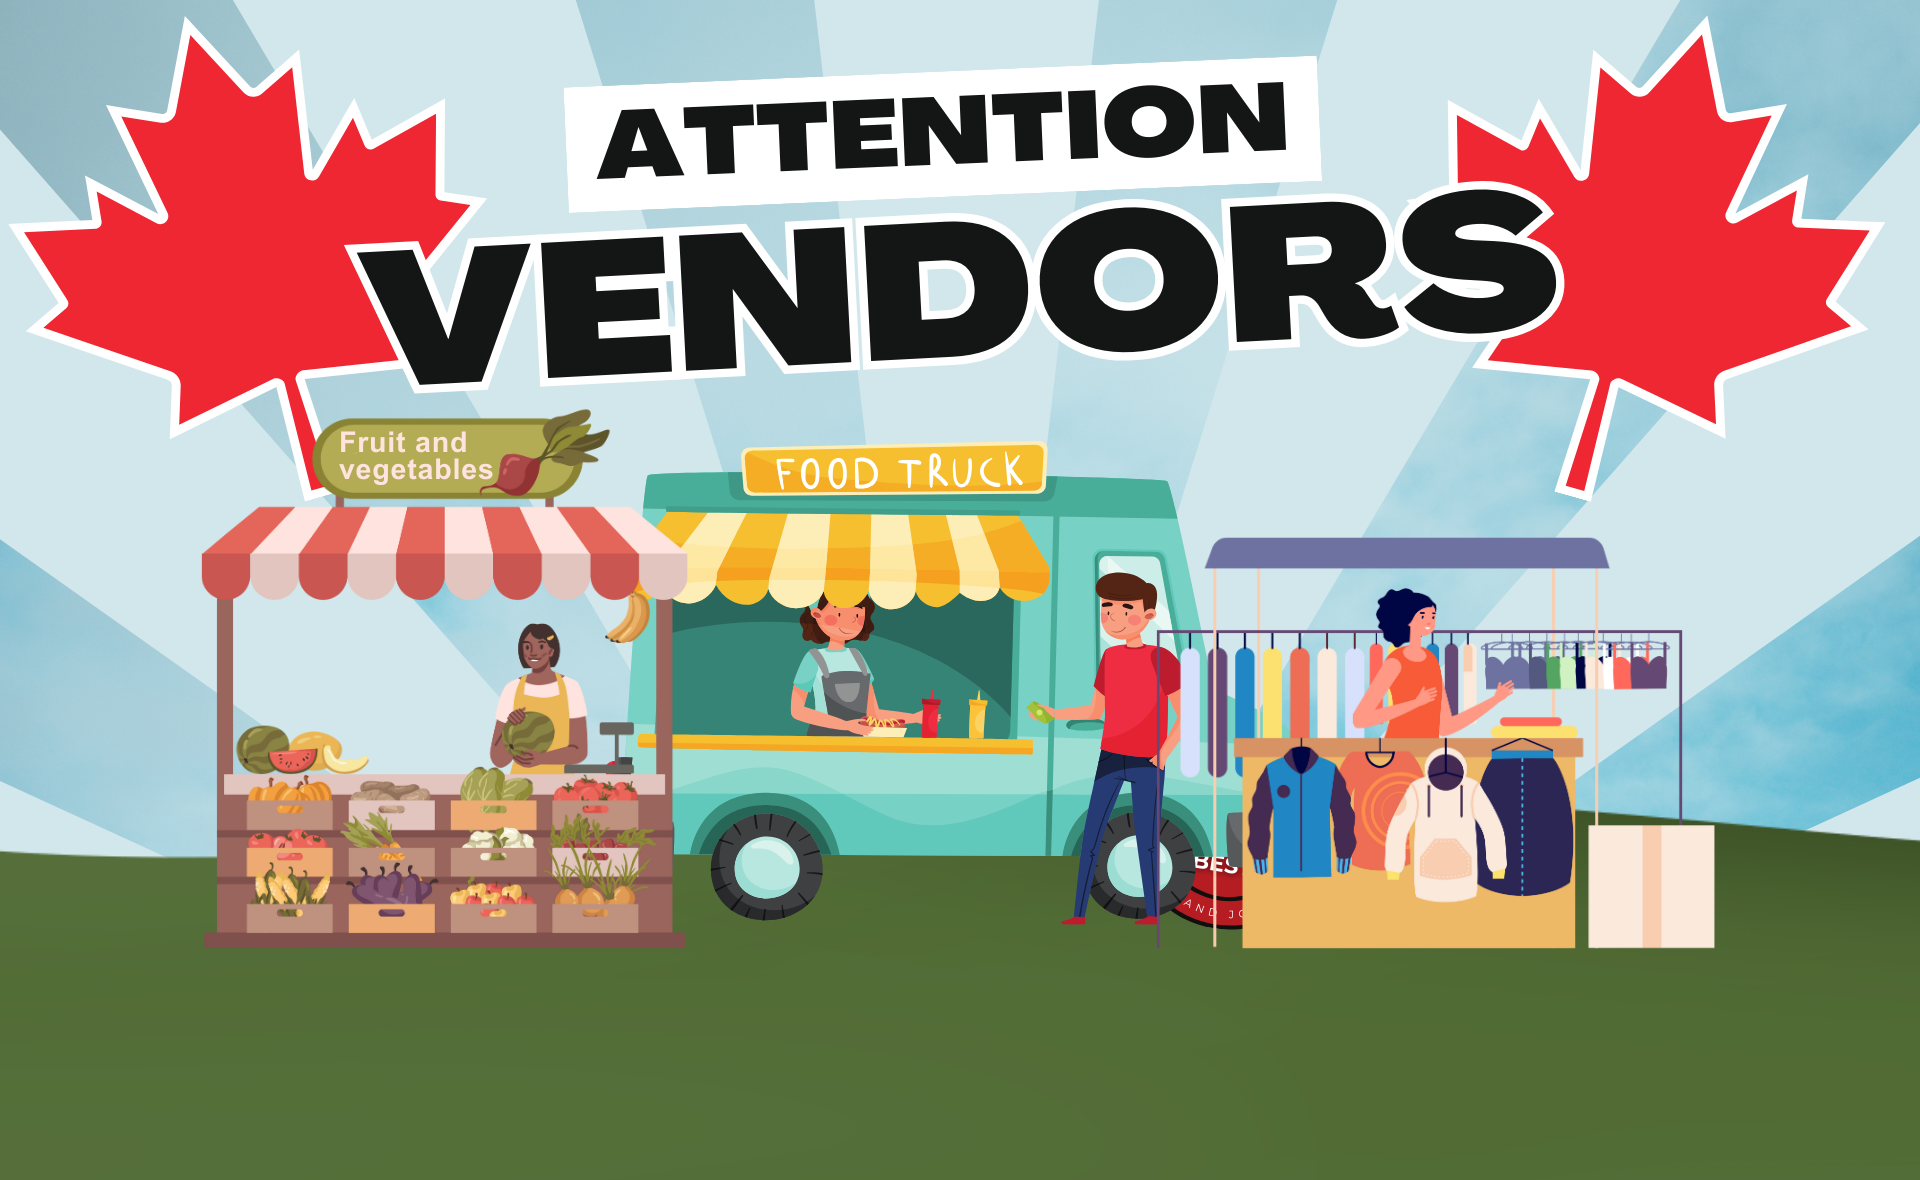 Cartoon farm vendor, food truck and clothing vendor with maple leaves and the words Attention Vendors